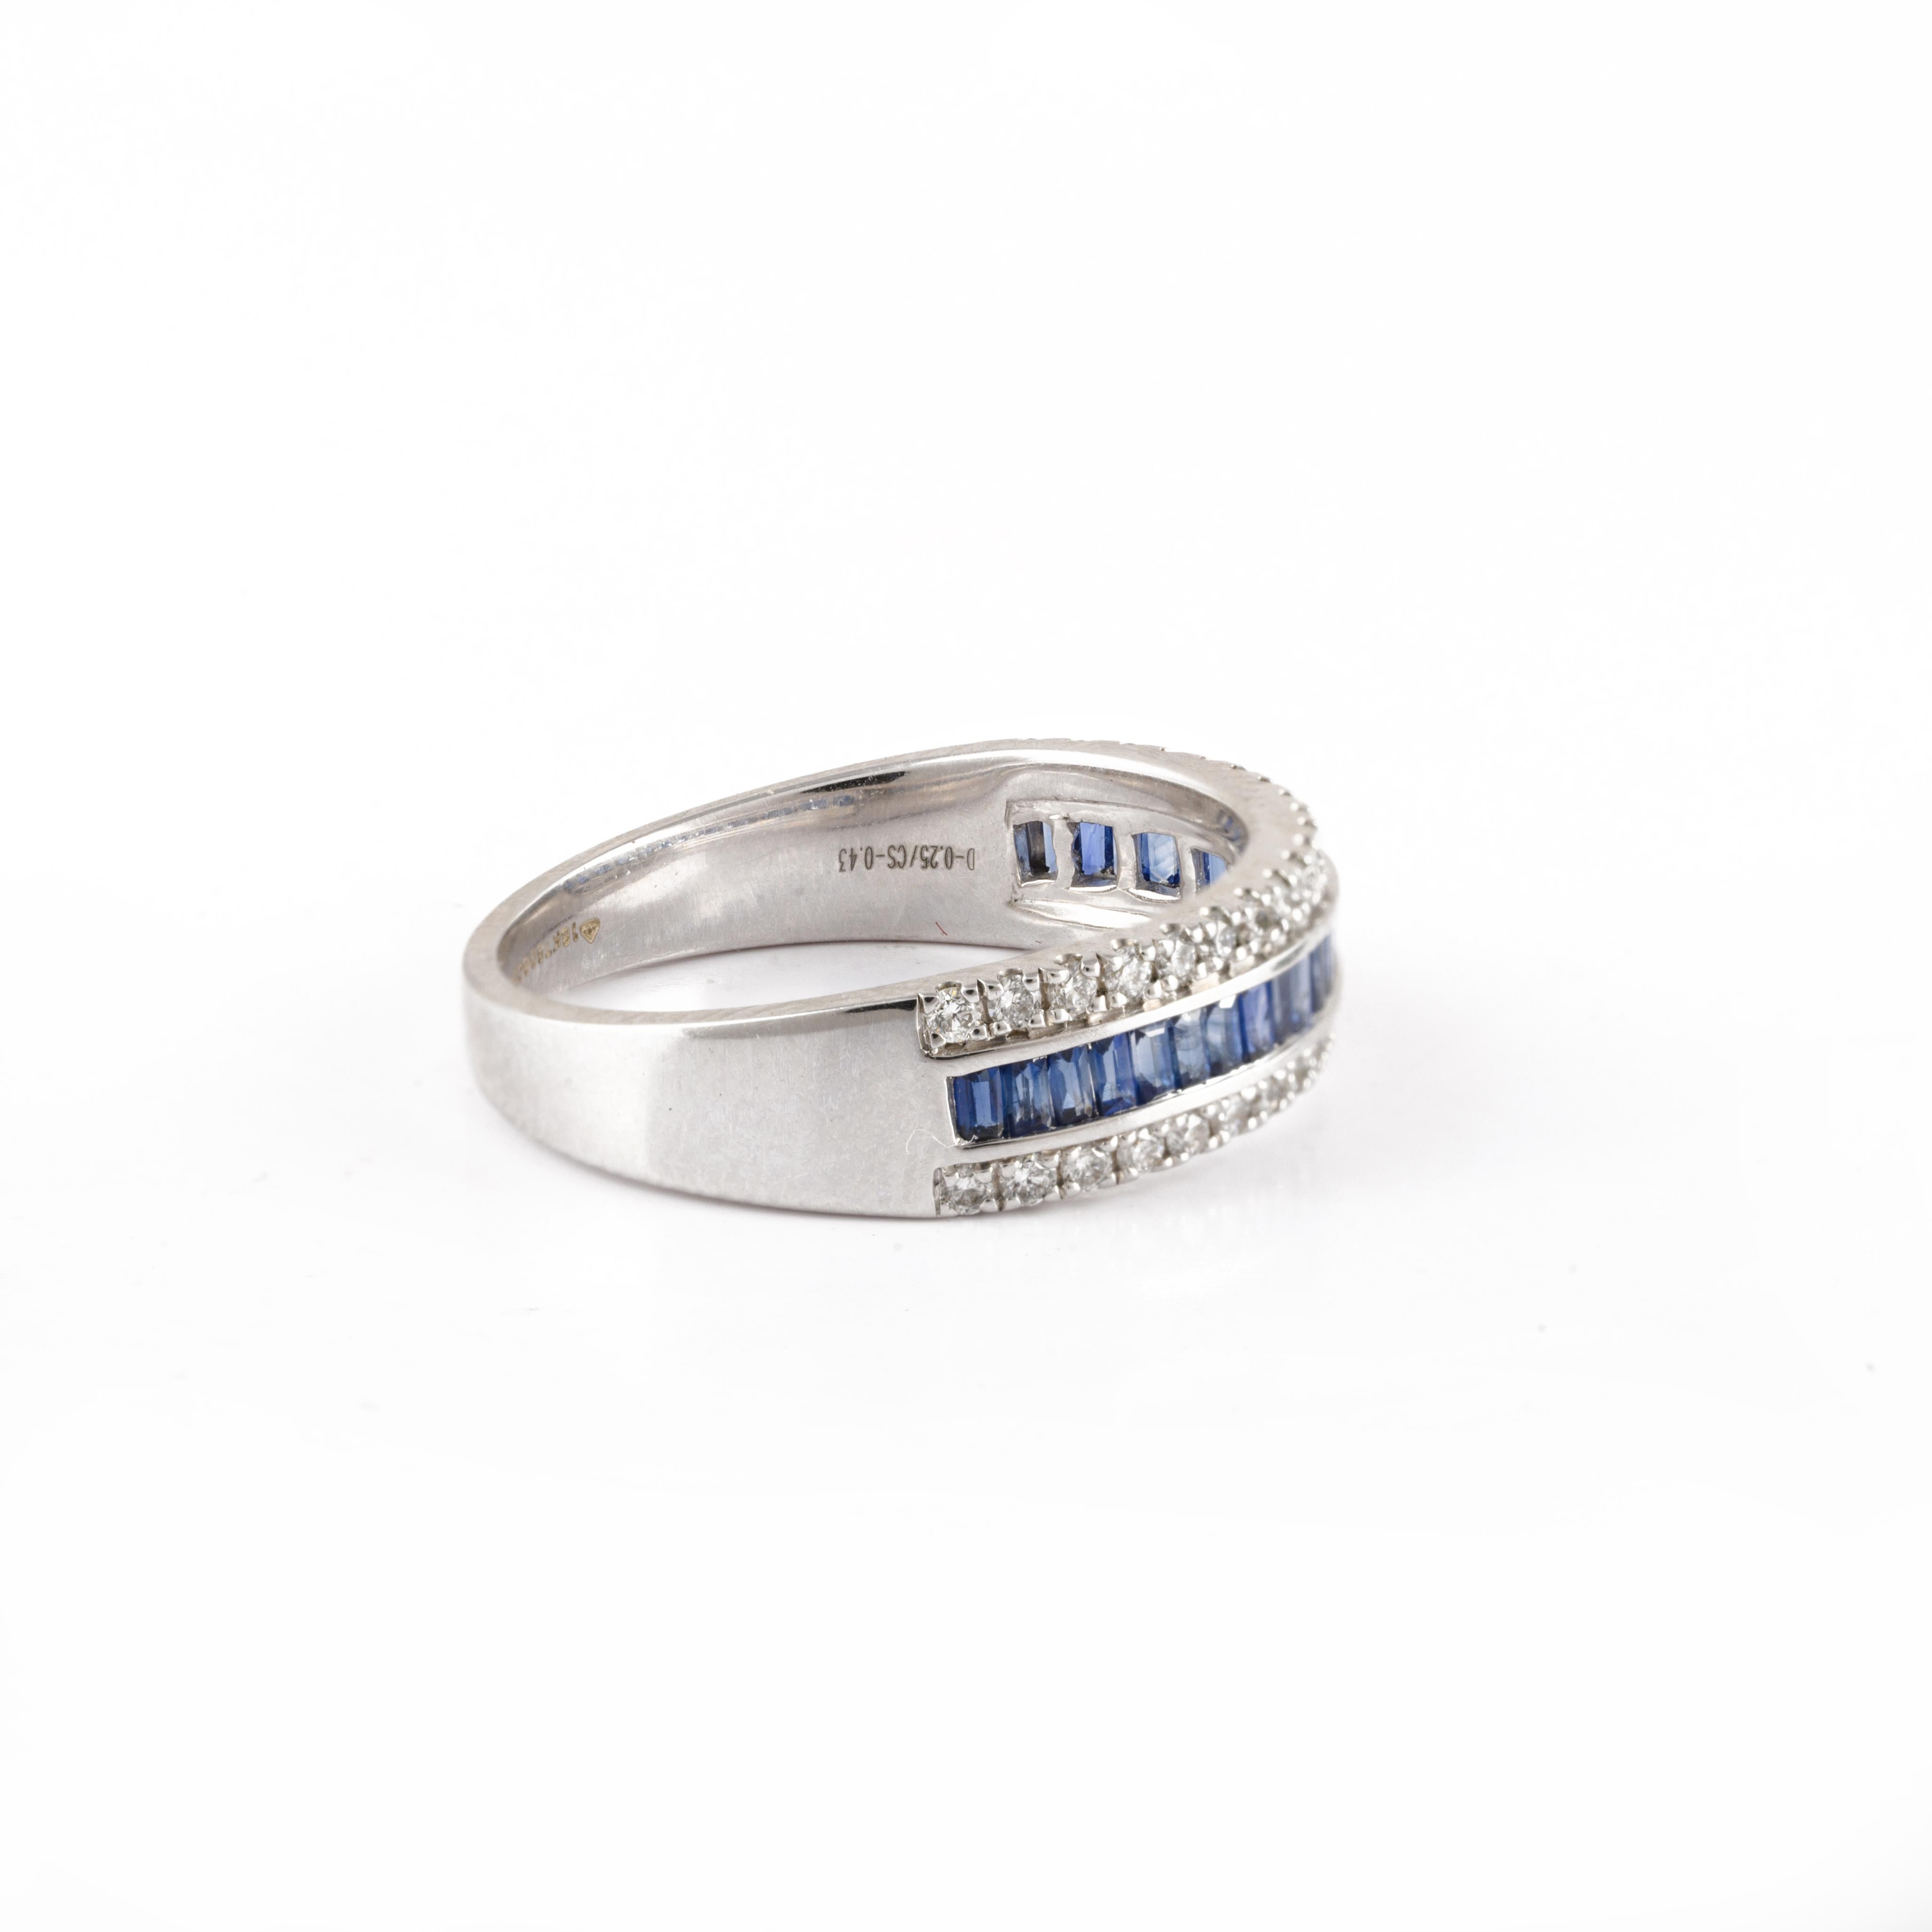 For Sale:  Natural Blue Sapphire Diamond Wedding Ring Crafted in 18k Solid White Gold 4